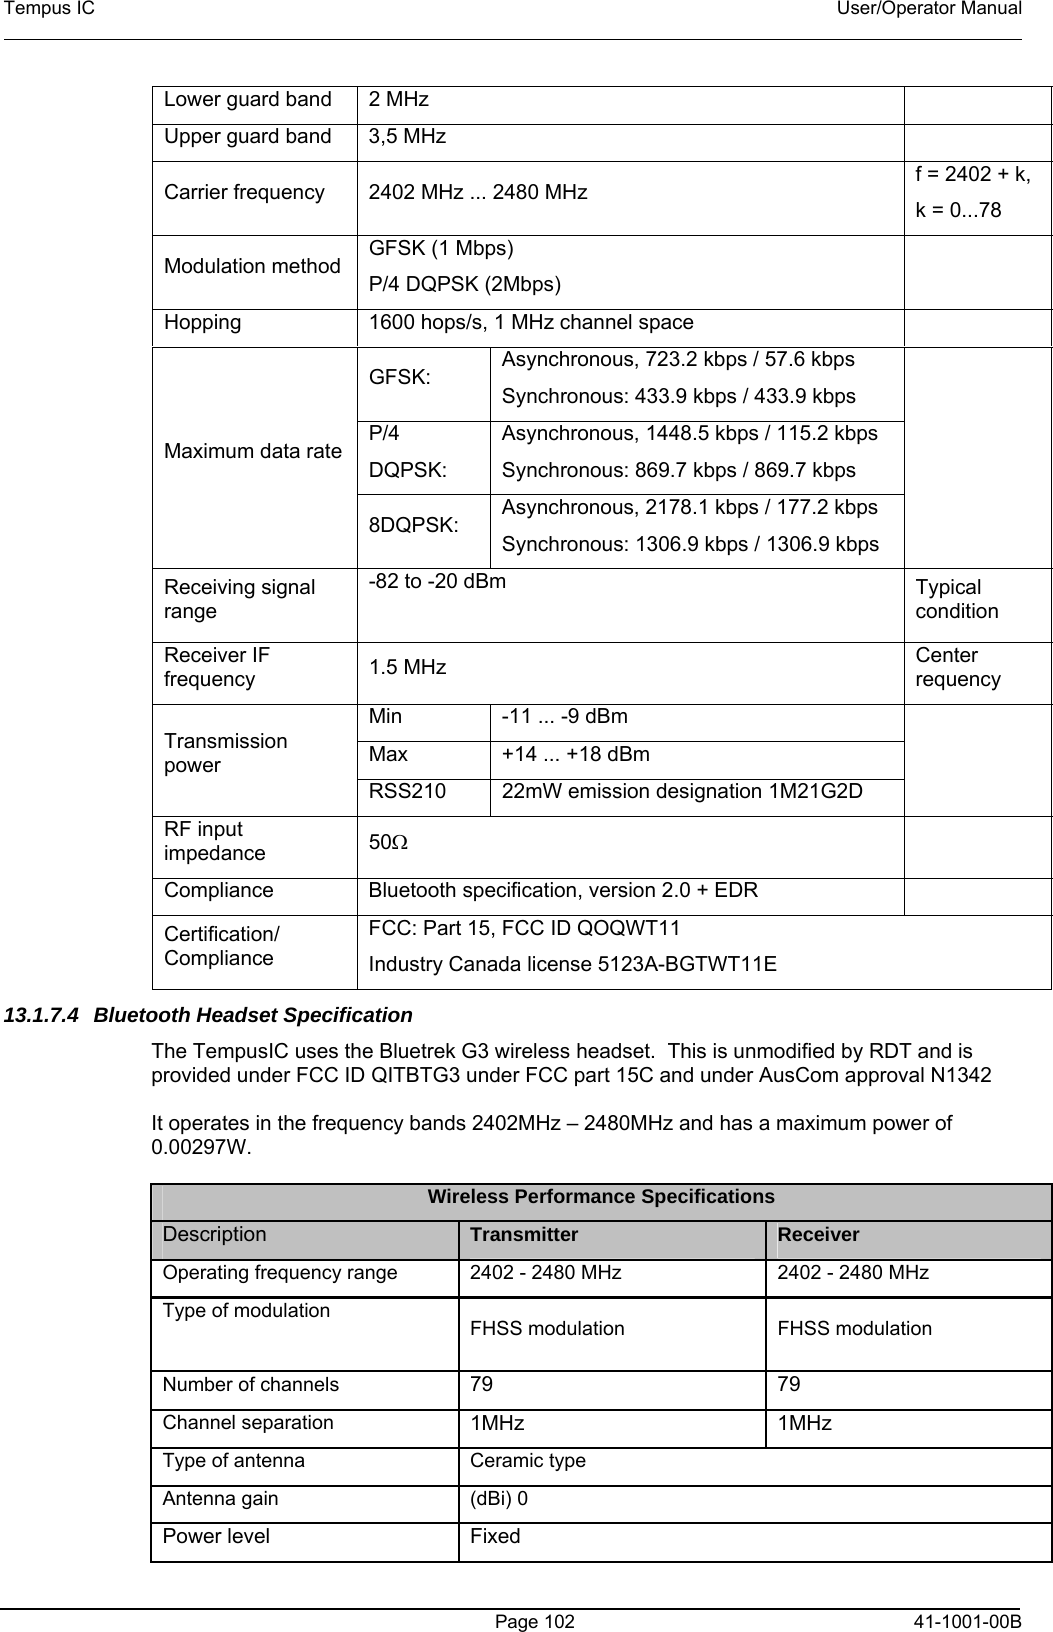 Tempus IC    User/Operator Manual     Page 102  41-1001-00B Lower guard band  2 MHz   Upper guard band  3,5 MHz   Carrier frequency  2402 MHz ... 2480 MHz  f = 2402 + k, k = 0...78 Modulation method  GFSK (1 Mbps) P/4 DQPSK (2Mbps)   Hopping  1600 hops/s, 1 MHz channel space   GFSK:  Asynchronous, 723.2 kbps / 57.6 kbps Synchronous: 433.9 kbps / 433.9 kbps P/4 DQPSK: Asynchronous, 1448.5 kbps / 115.2 kbps Synchronous: 869.7 kbps / 869.7 kbps Maximum data rate 8DQPSK:  Asynchronous, 2178.1 kbps / 177.2 kbps Synchronous: 1306.9 kbps / 1306.9 kbps  Receiving signal range -82 to -20 dBm  Typical condition Receiver IF frequency  1.5 MHz  Center  requency Min  -11 ... -9 dBm Max  +14 ... +18 dBm Transmission power RSS210  22mW emission designation 1M21G2D  RF input impedance  50Ω  Compliance Bluetooth specification, version 2.0 + EDR   Certification/ Compliance FCC: Part 15, FCC ID QOQWT11 Industry Canada license 5123A-BGTWT11E 13.1.7.4 Bluetooth Headset Specification The TempusIC uses the Bluetrek G3 wireless headset.  This is unmodified by RDT and is provided under FCC ID QITBTG3 under FCC part 15C and under AusCom approval N1342    It operates in the frequency bands 2402MHz – 2480MHz and has a maximum power of 0.00297W.  Wireless Performance Specifications Description  Transmitter  Receiver Operating frequency range 2402 - 2480 MHz 2402 - 2480 MHz Type of modulation   FHSS modulation FHSS modulation Number of channels 79 79 Channel separation 1MHz 1MHz Type of antenna Ceramic type Antenna gain  (dBi) 0 Power level  Fixed  